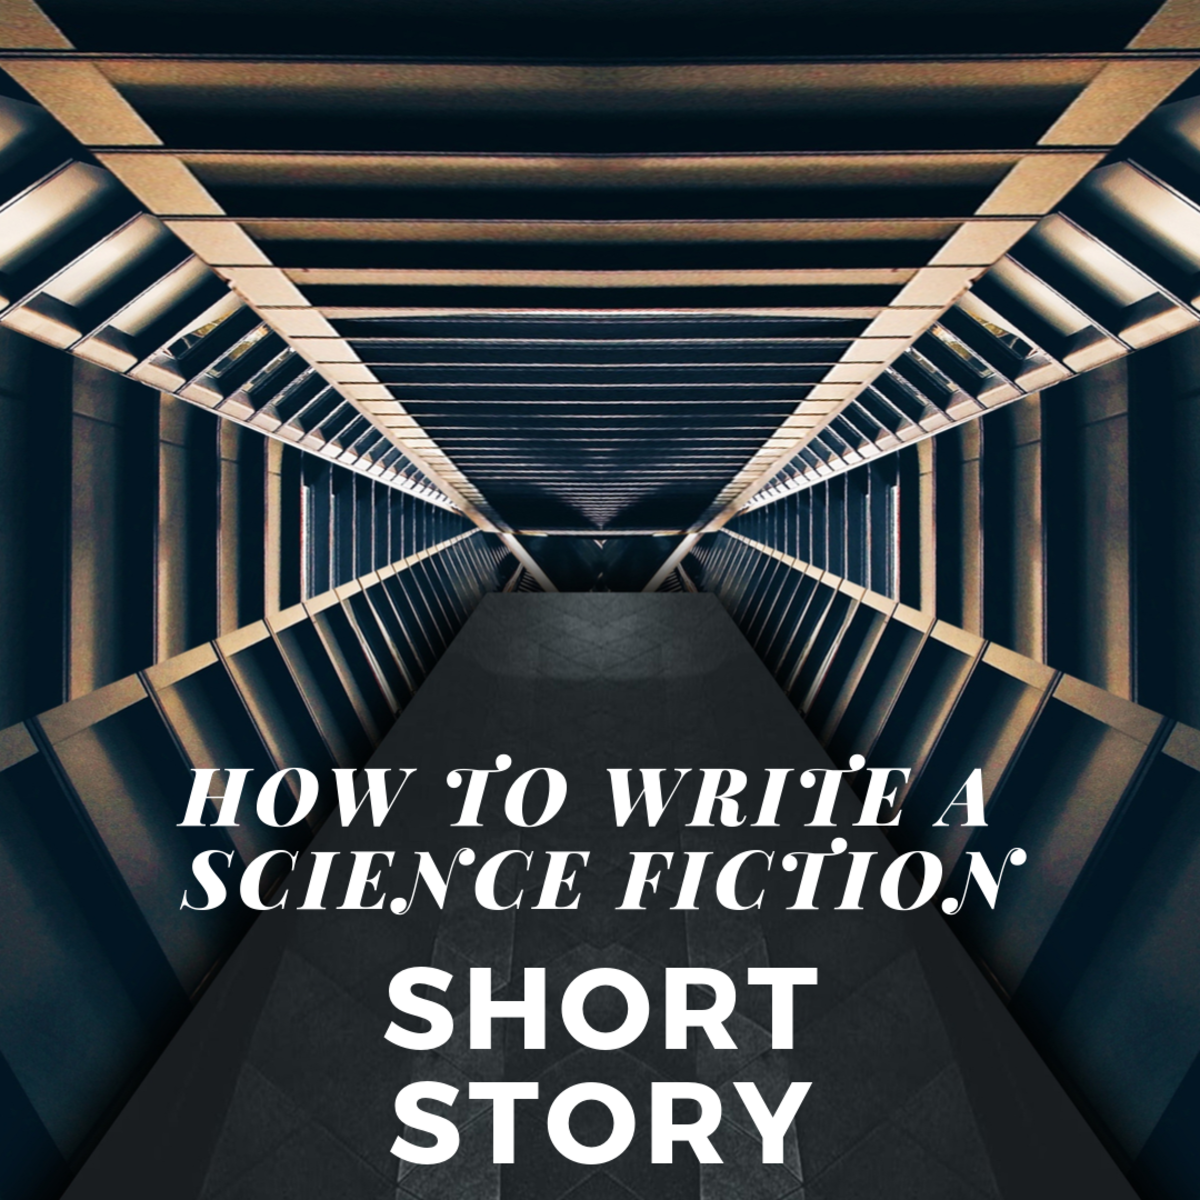 How to Write a Science Fiction Short Story